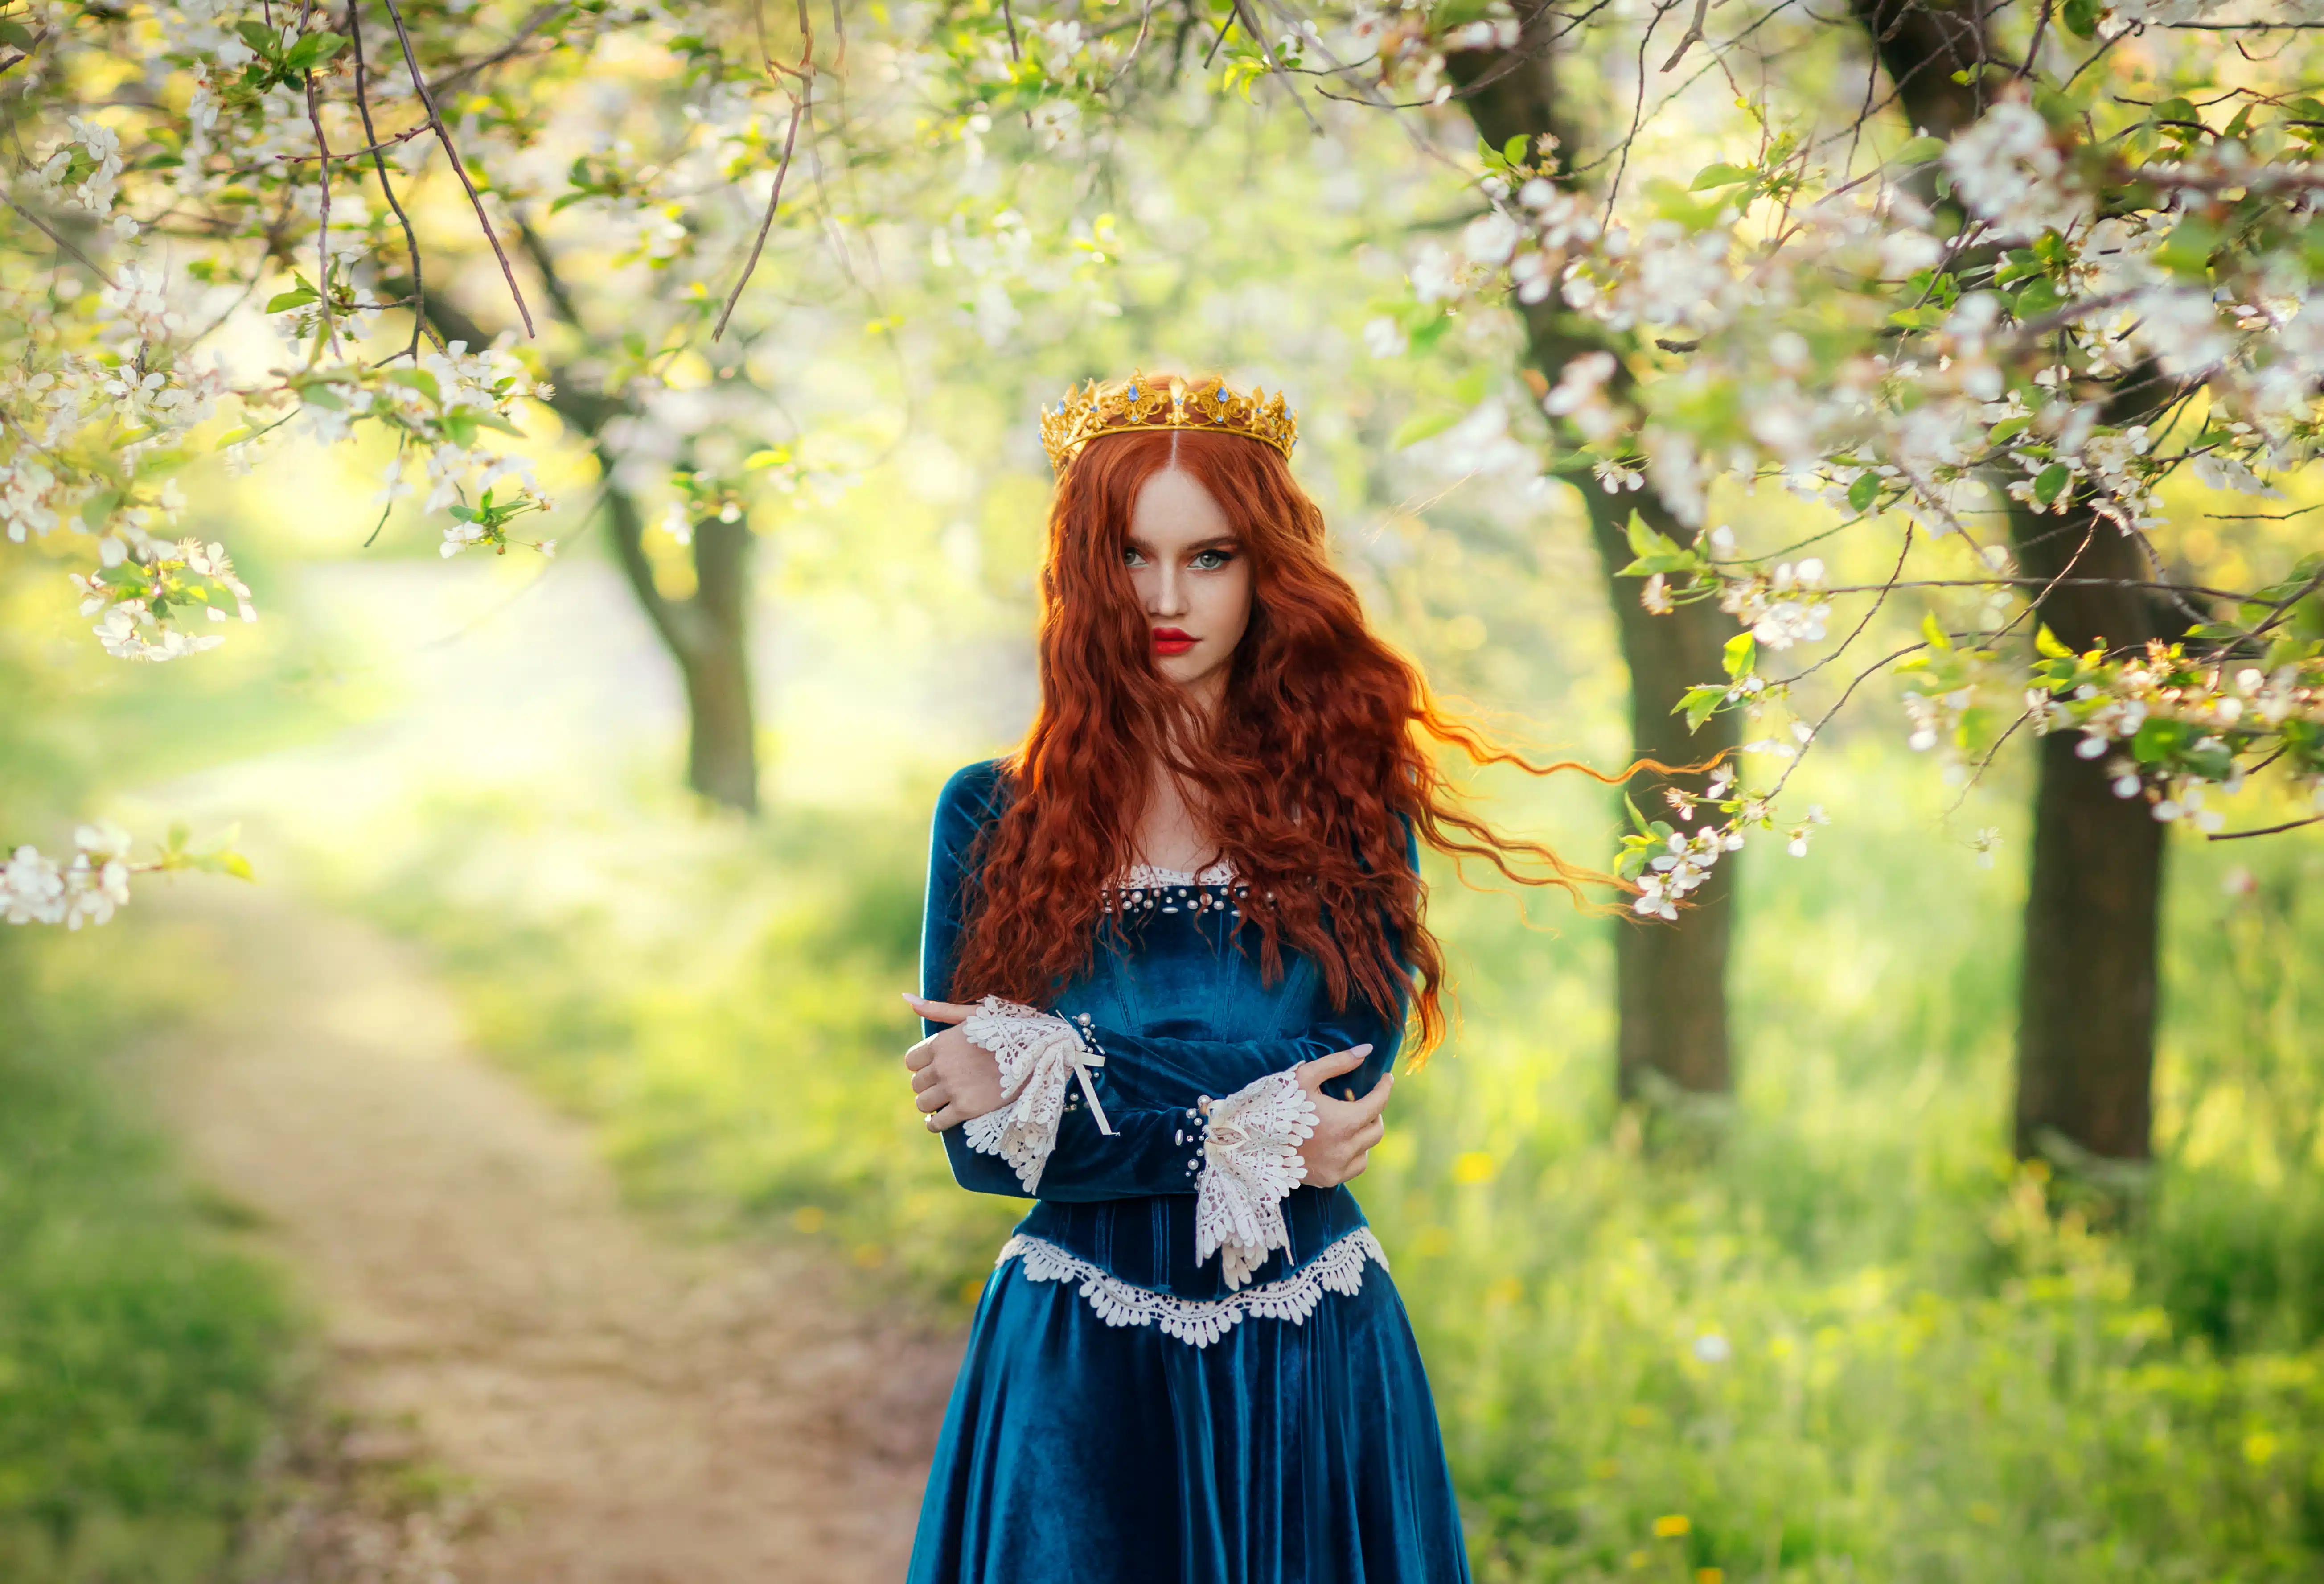 redhead princess with fierce look standing on a path in the woods